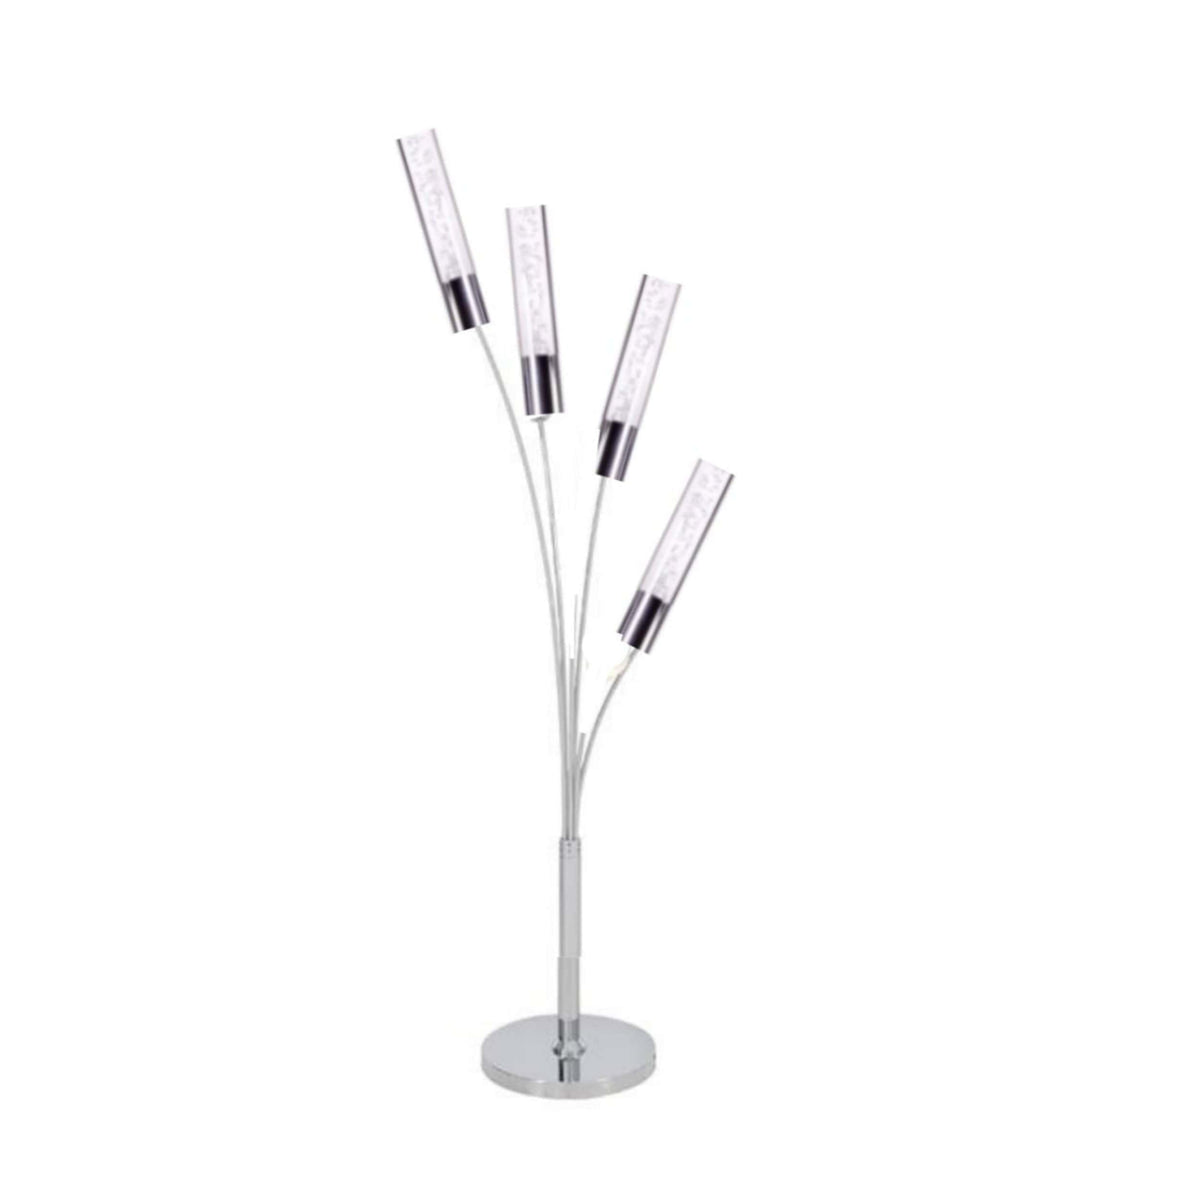 4 Light Blooming in Acrylic Table Lamp in Chrome